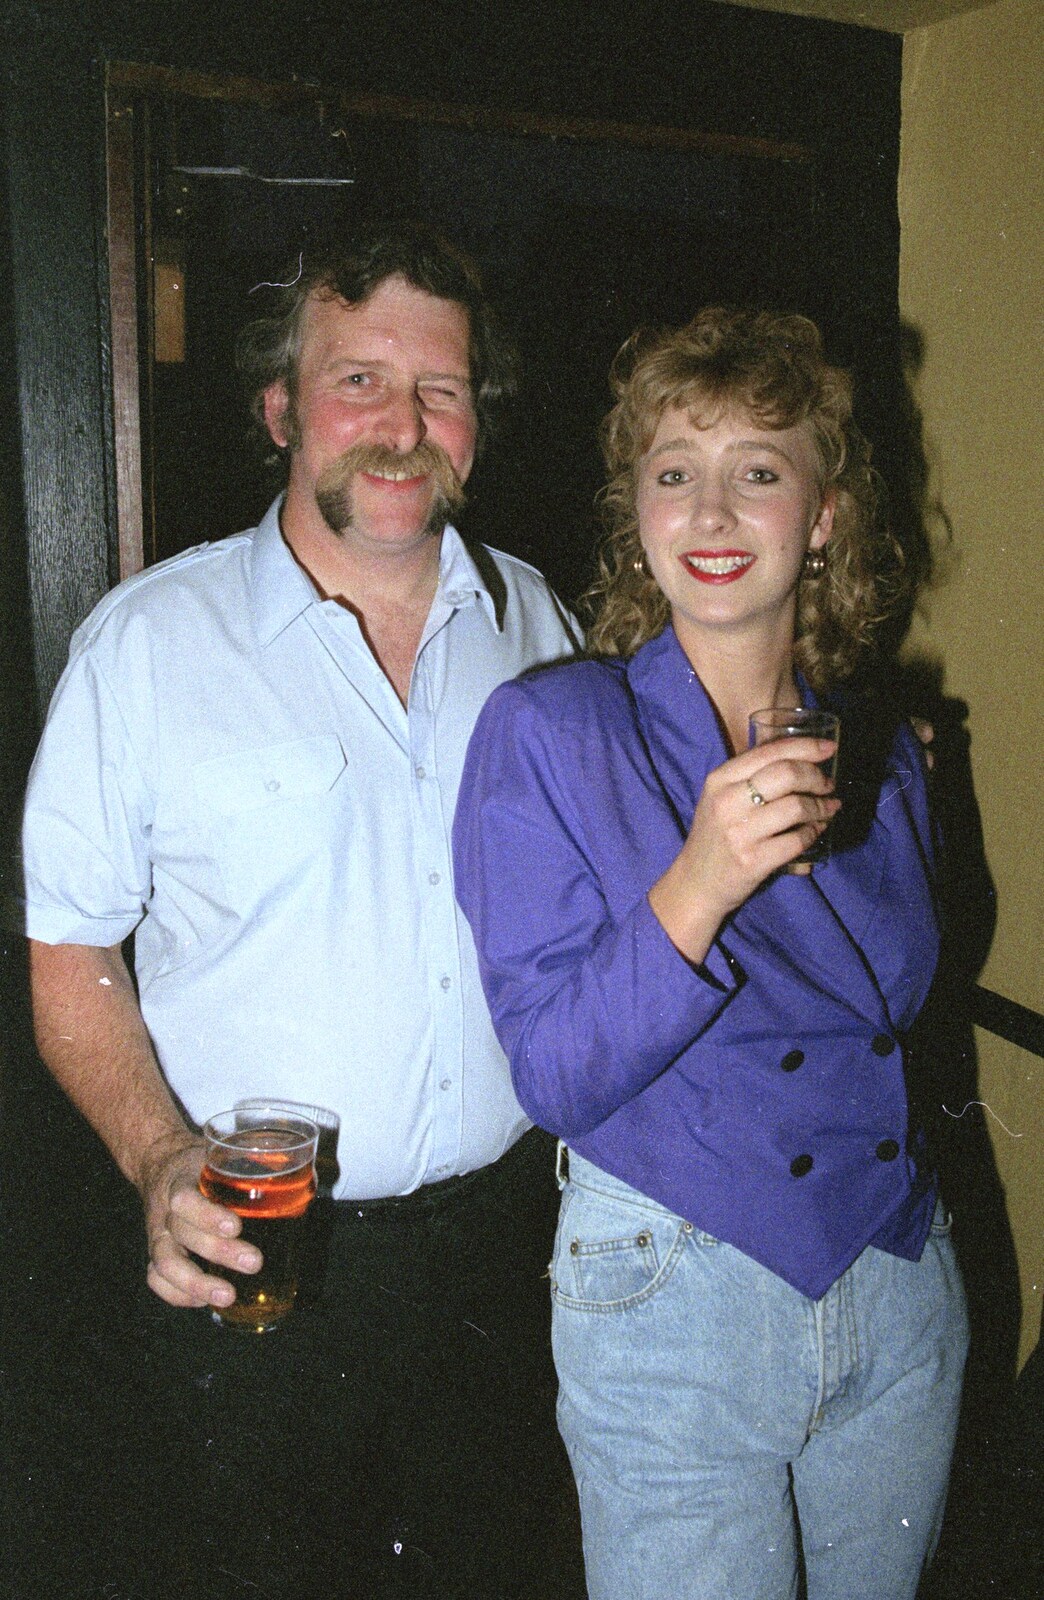 Stuston Sewerage and Kate's Printec Birthday, Scole Inn, Norfolk and Suffolk - 2nd August 1990: Rod Todd and Kate